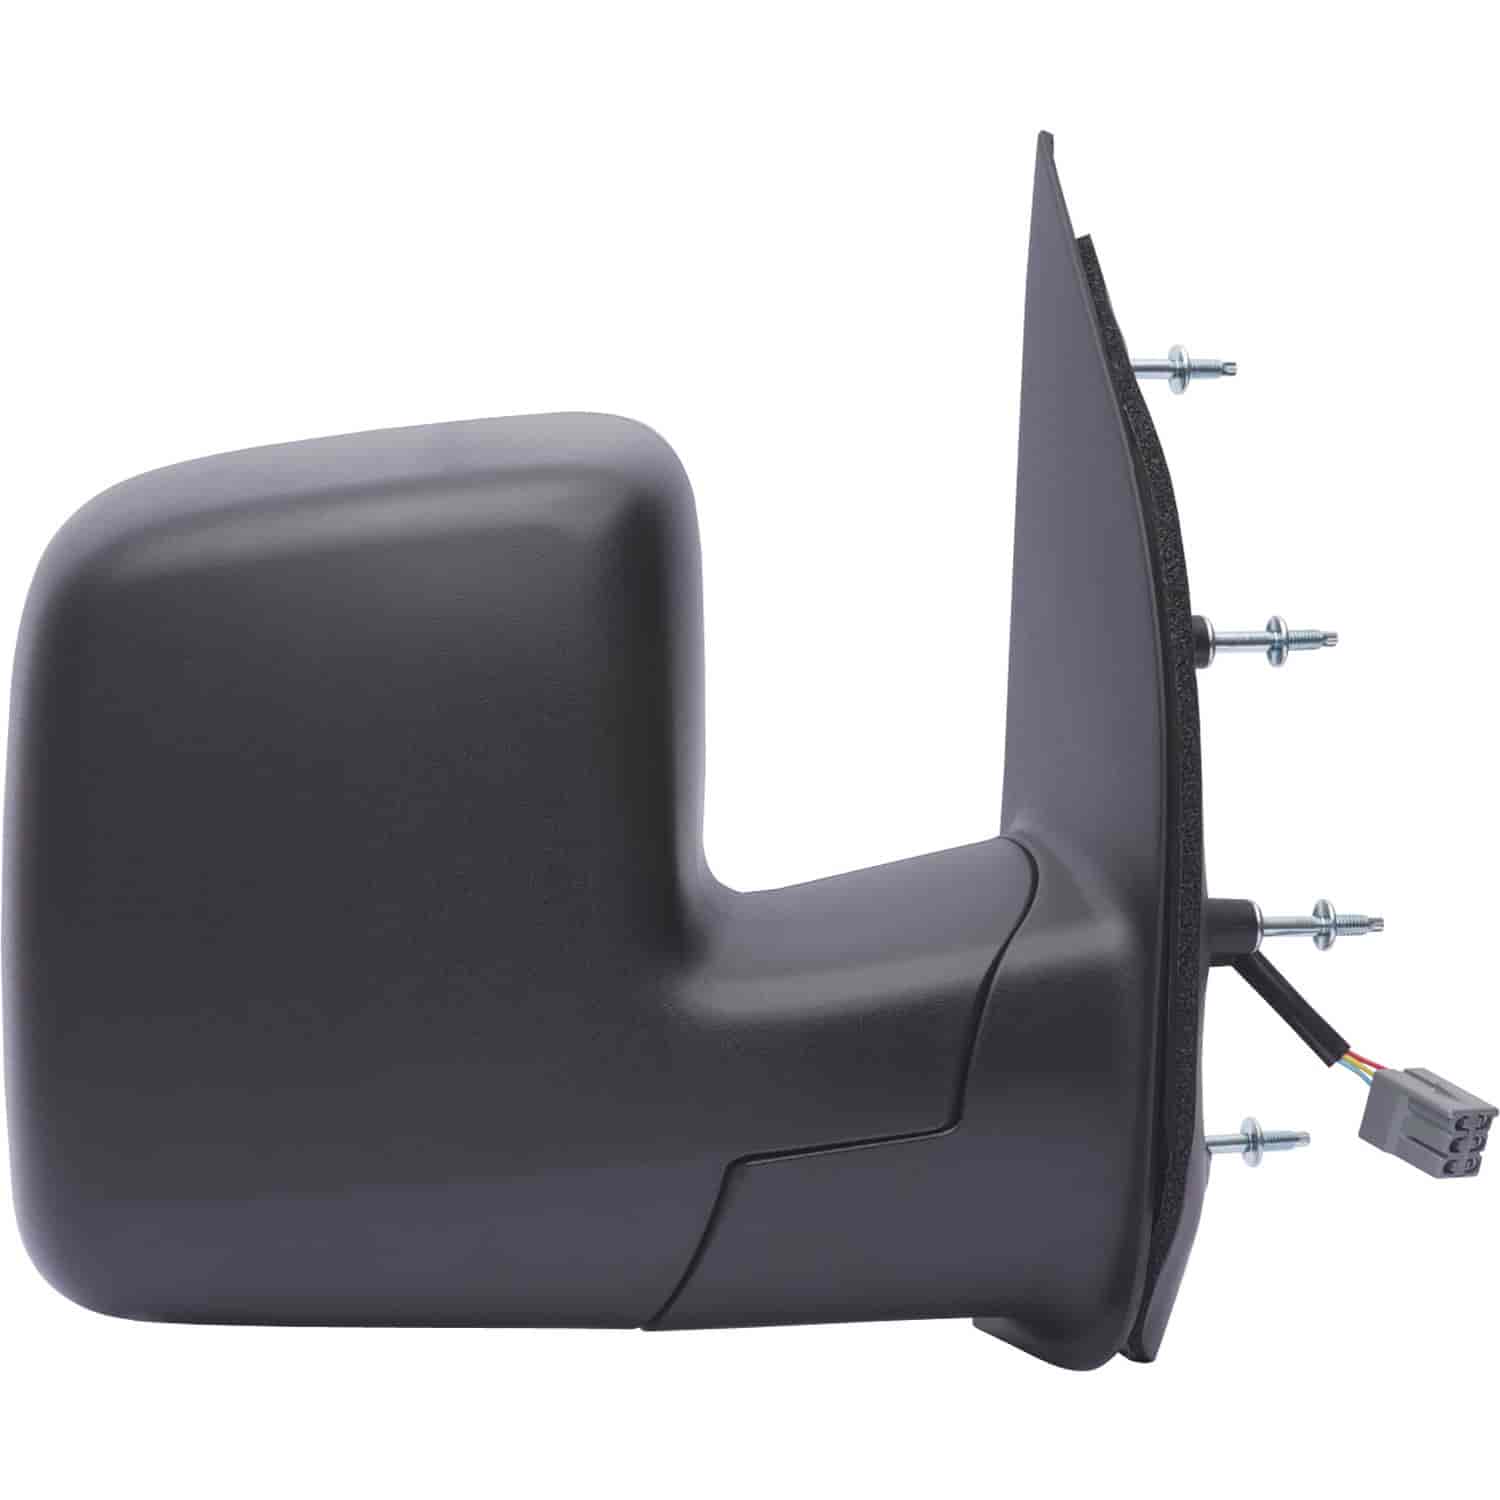 OEM Style Replacement mirror for 09 Ford Econoline Van single lens passenger side mirror tested to f